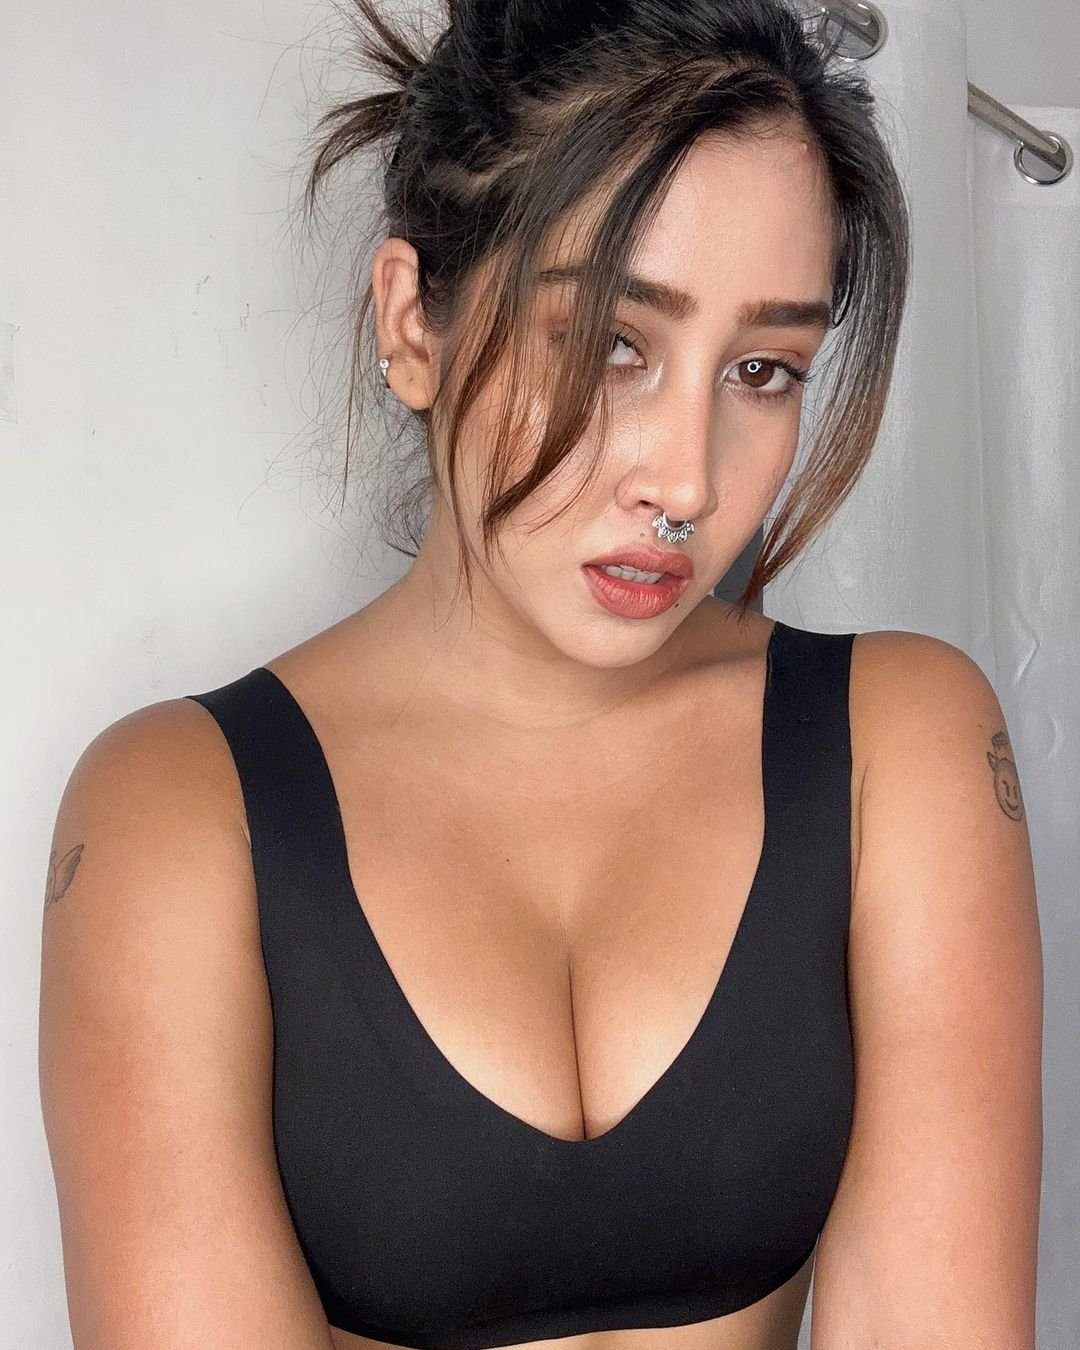 Indian Instagram girl Sofia Ansaris topless pic and cleavage...